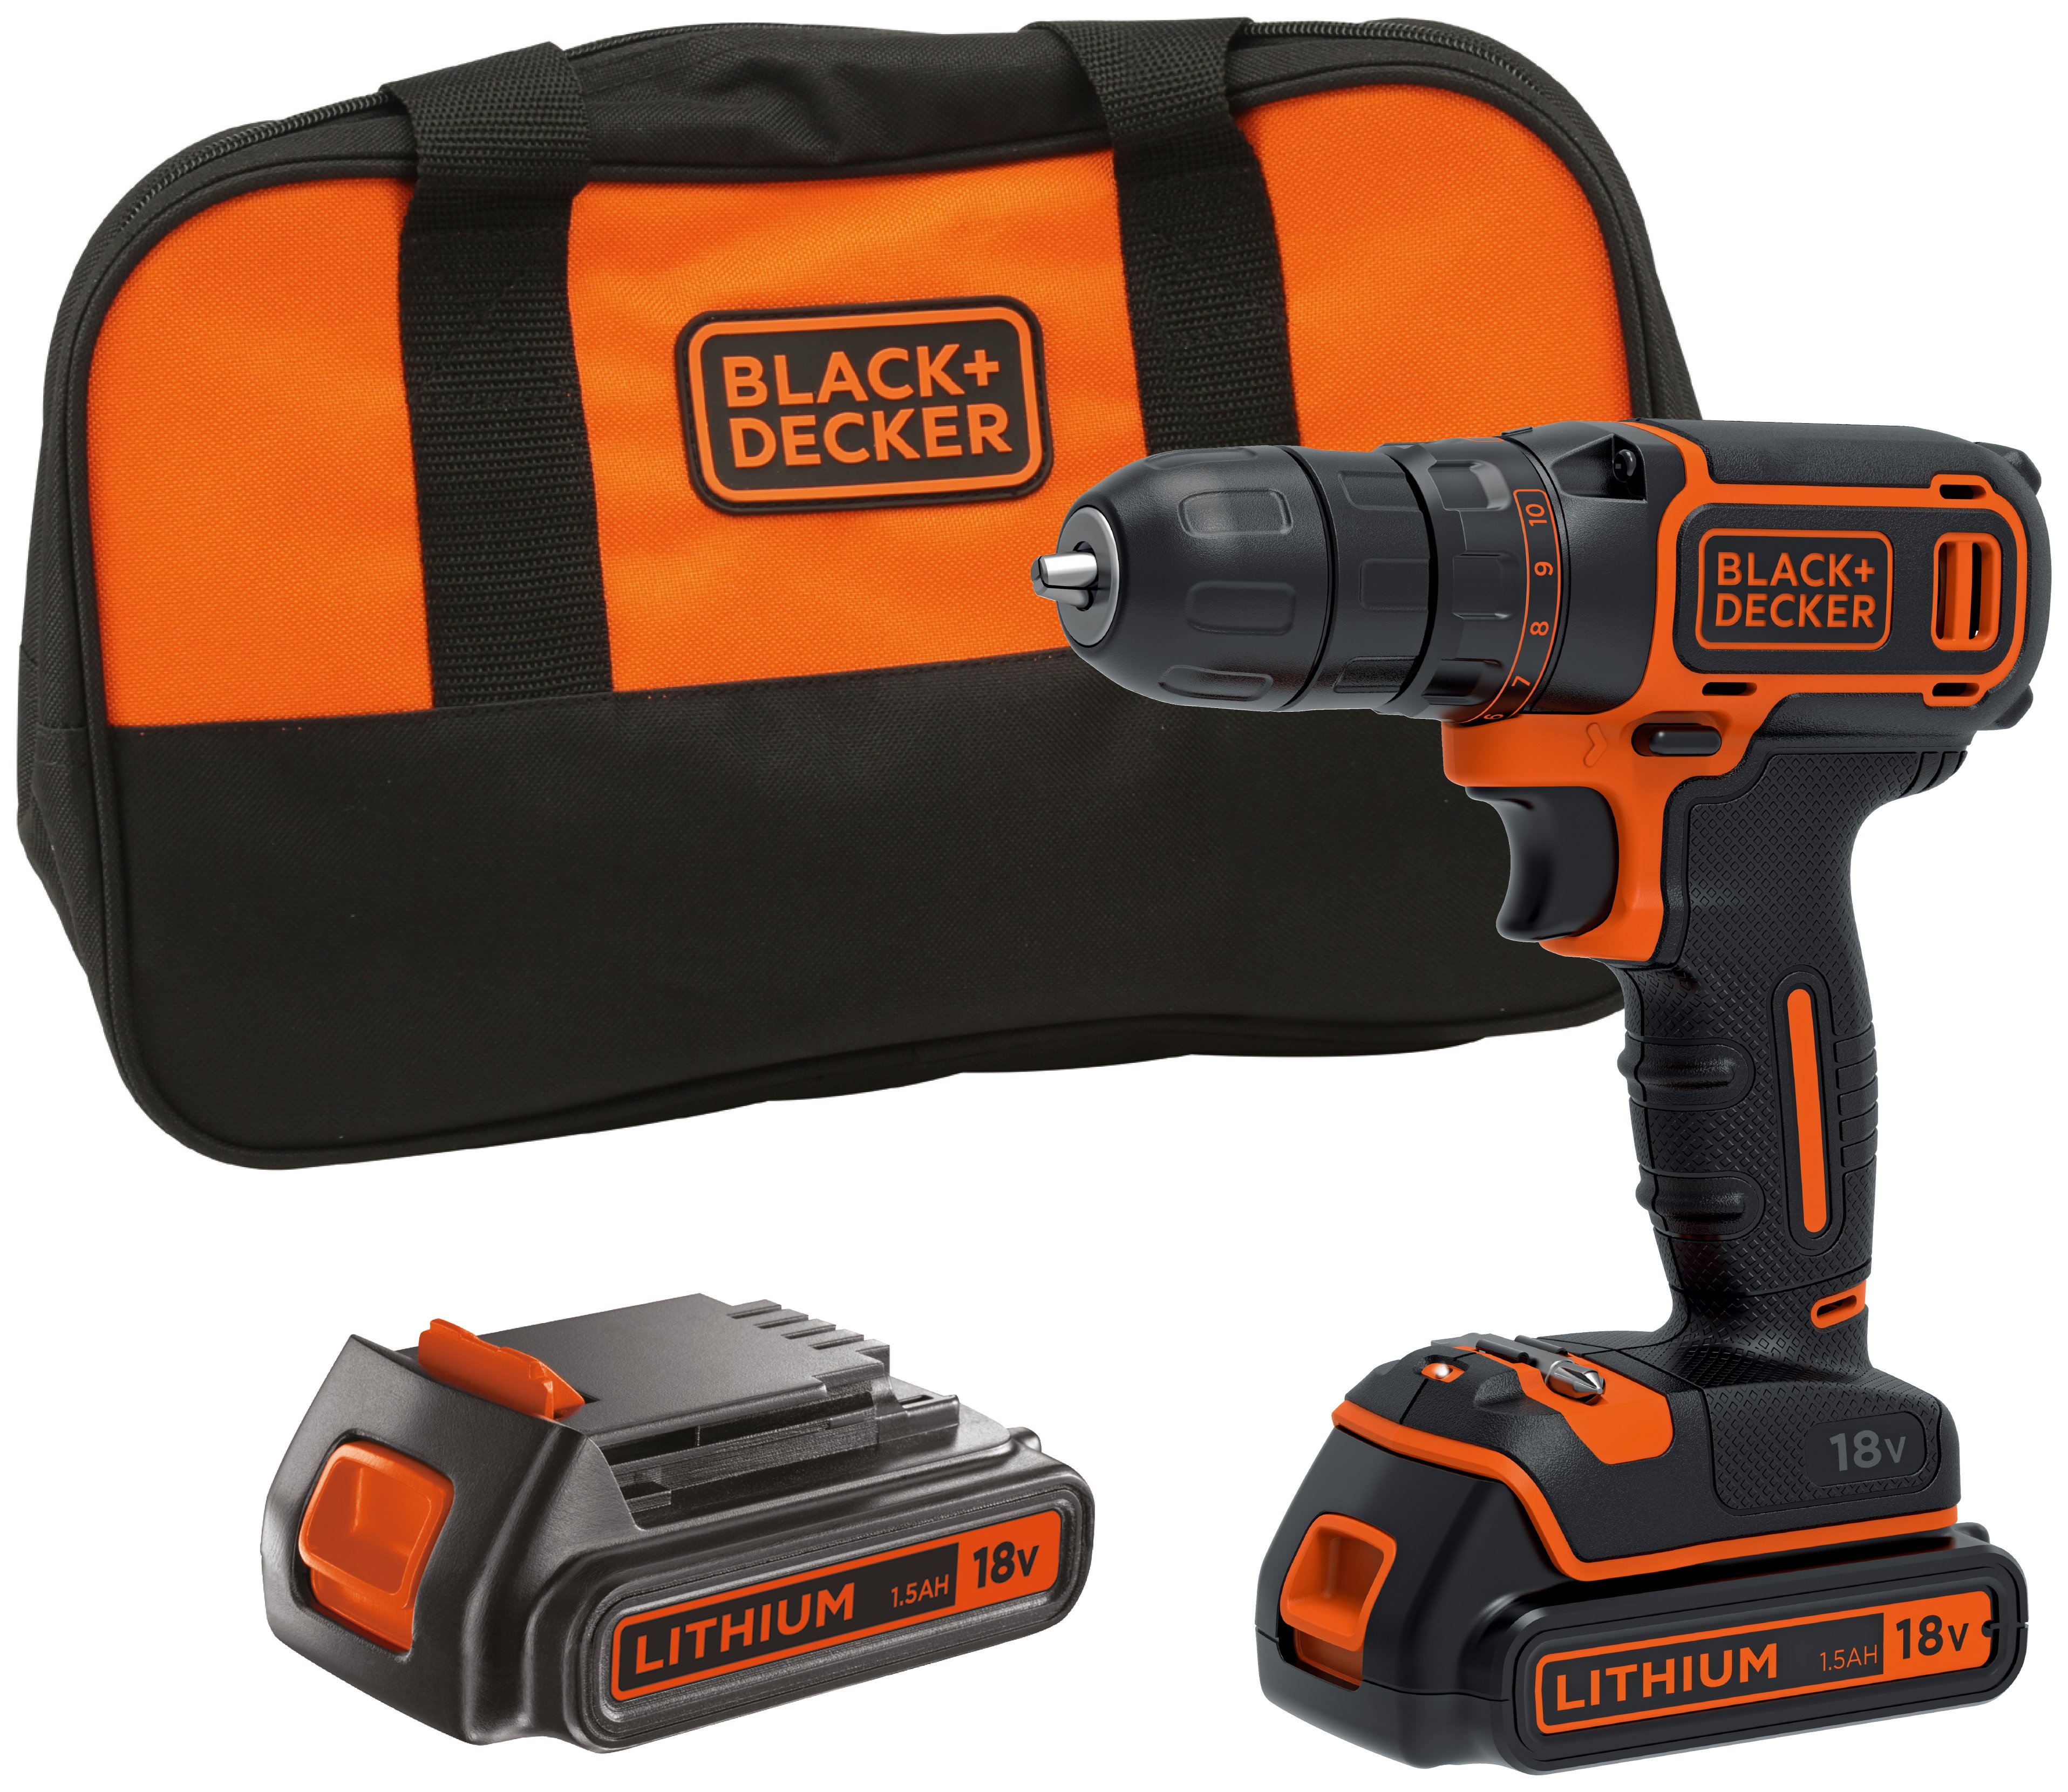 Black and Decker Cordless Drill Driver with 2 18V Batteries